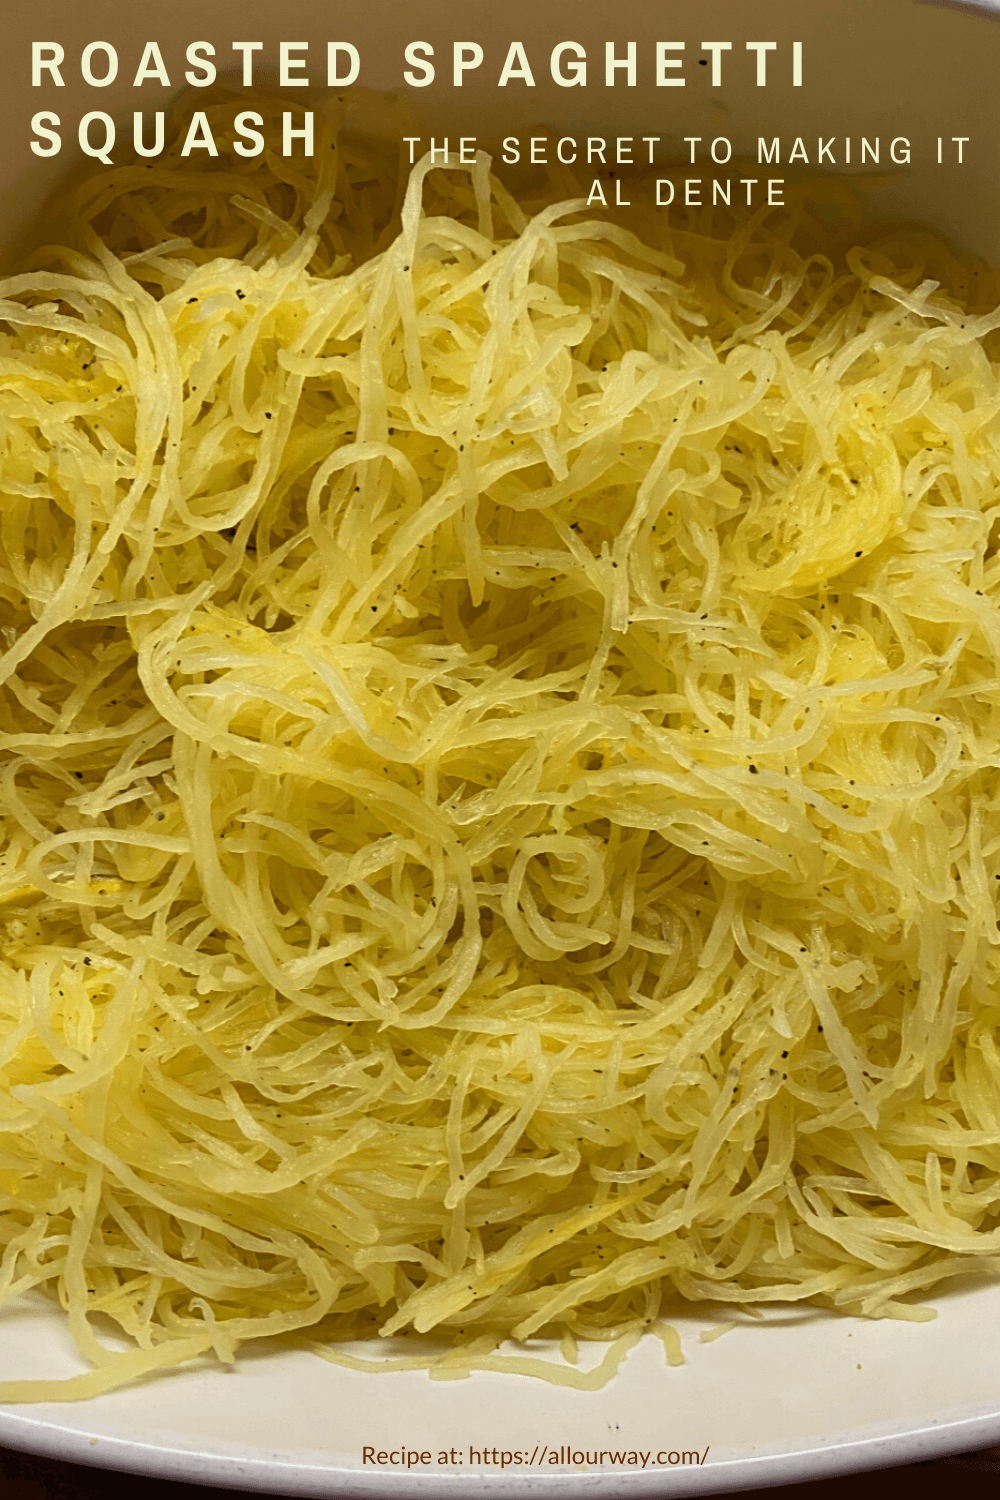 You can make spaghetti squash al dente. It's a matter of letting the squash release some of its liquid and then roasting with the right seasoning. Eat the squash as is or use it in your favorite pasta dishes.